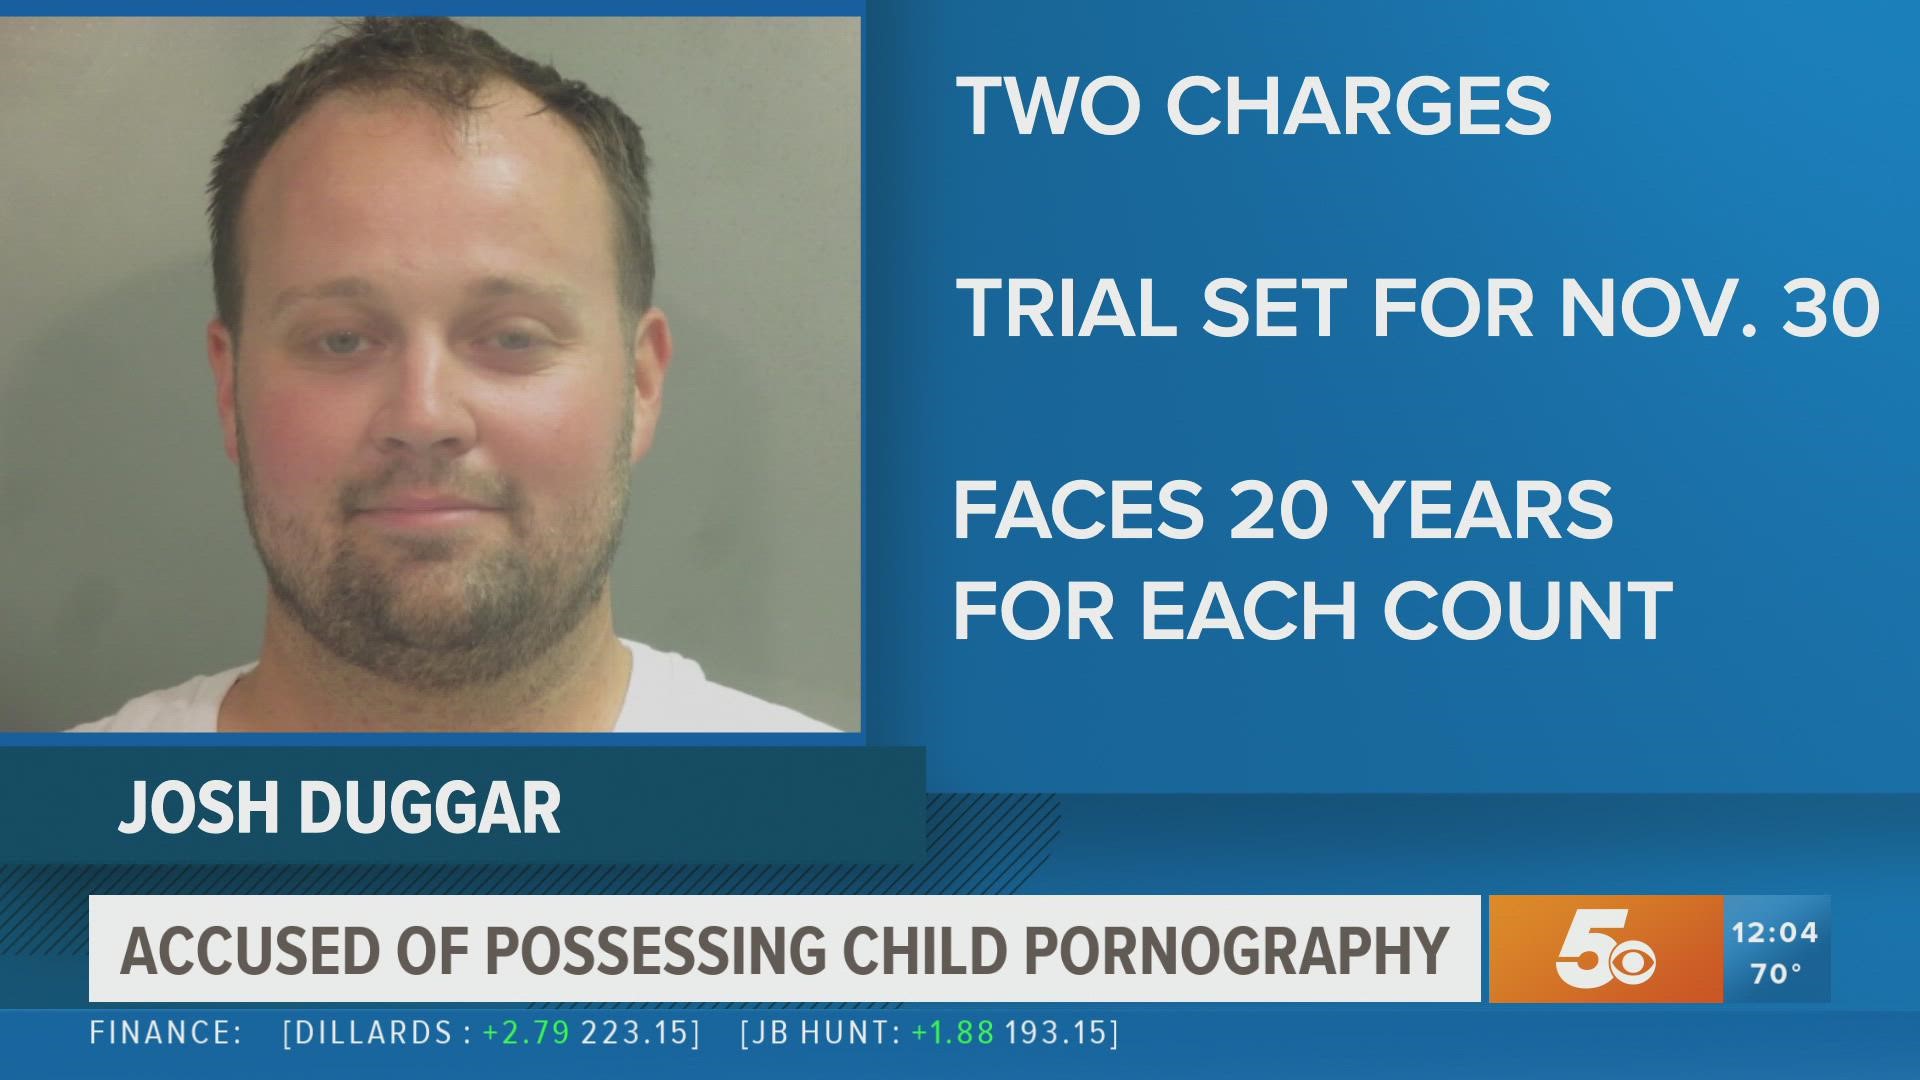 Duggar was charged in April with two counts of downloading and possessing child pornography.